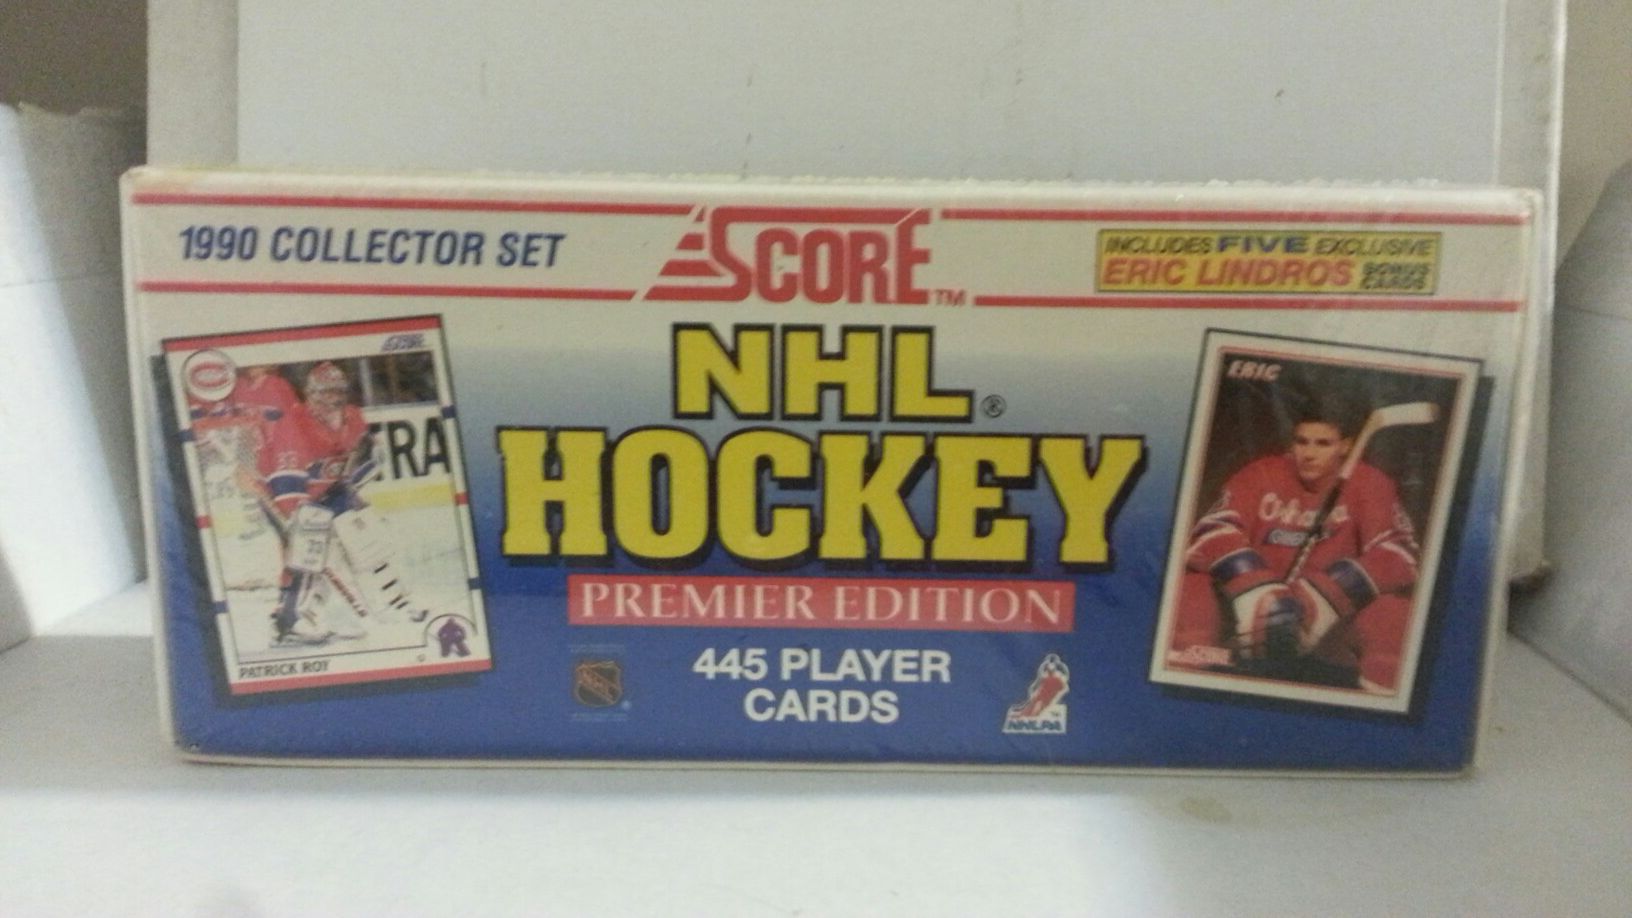 Score 1990 Collector Set NHL Hockey Premier Edition Never Opened!